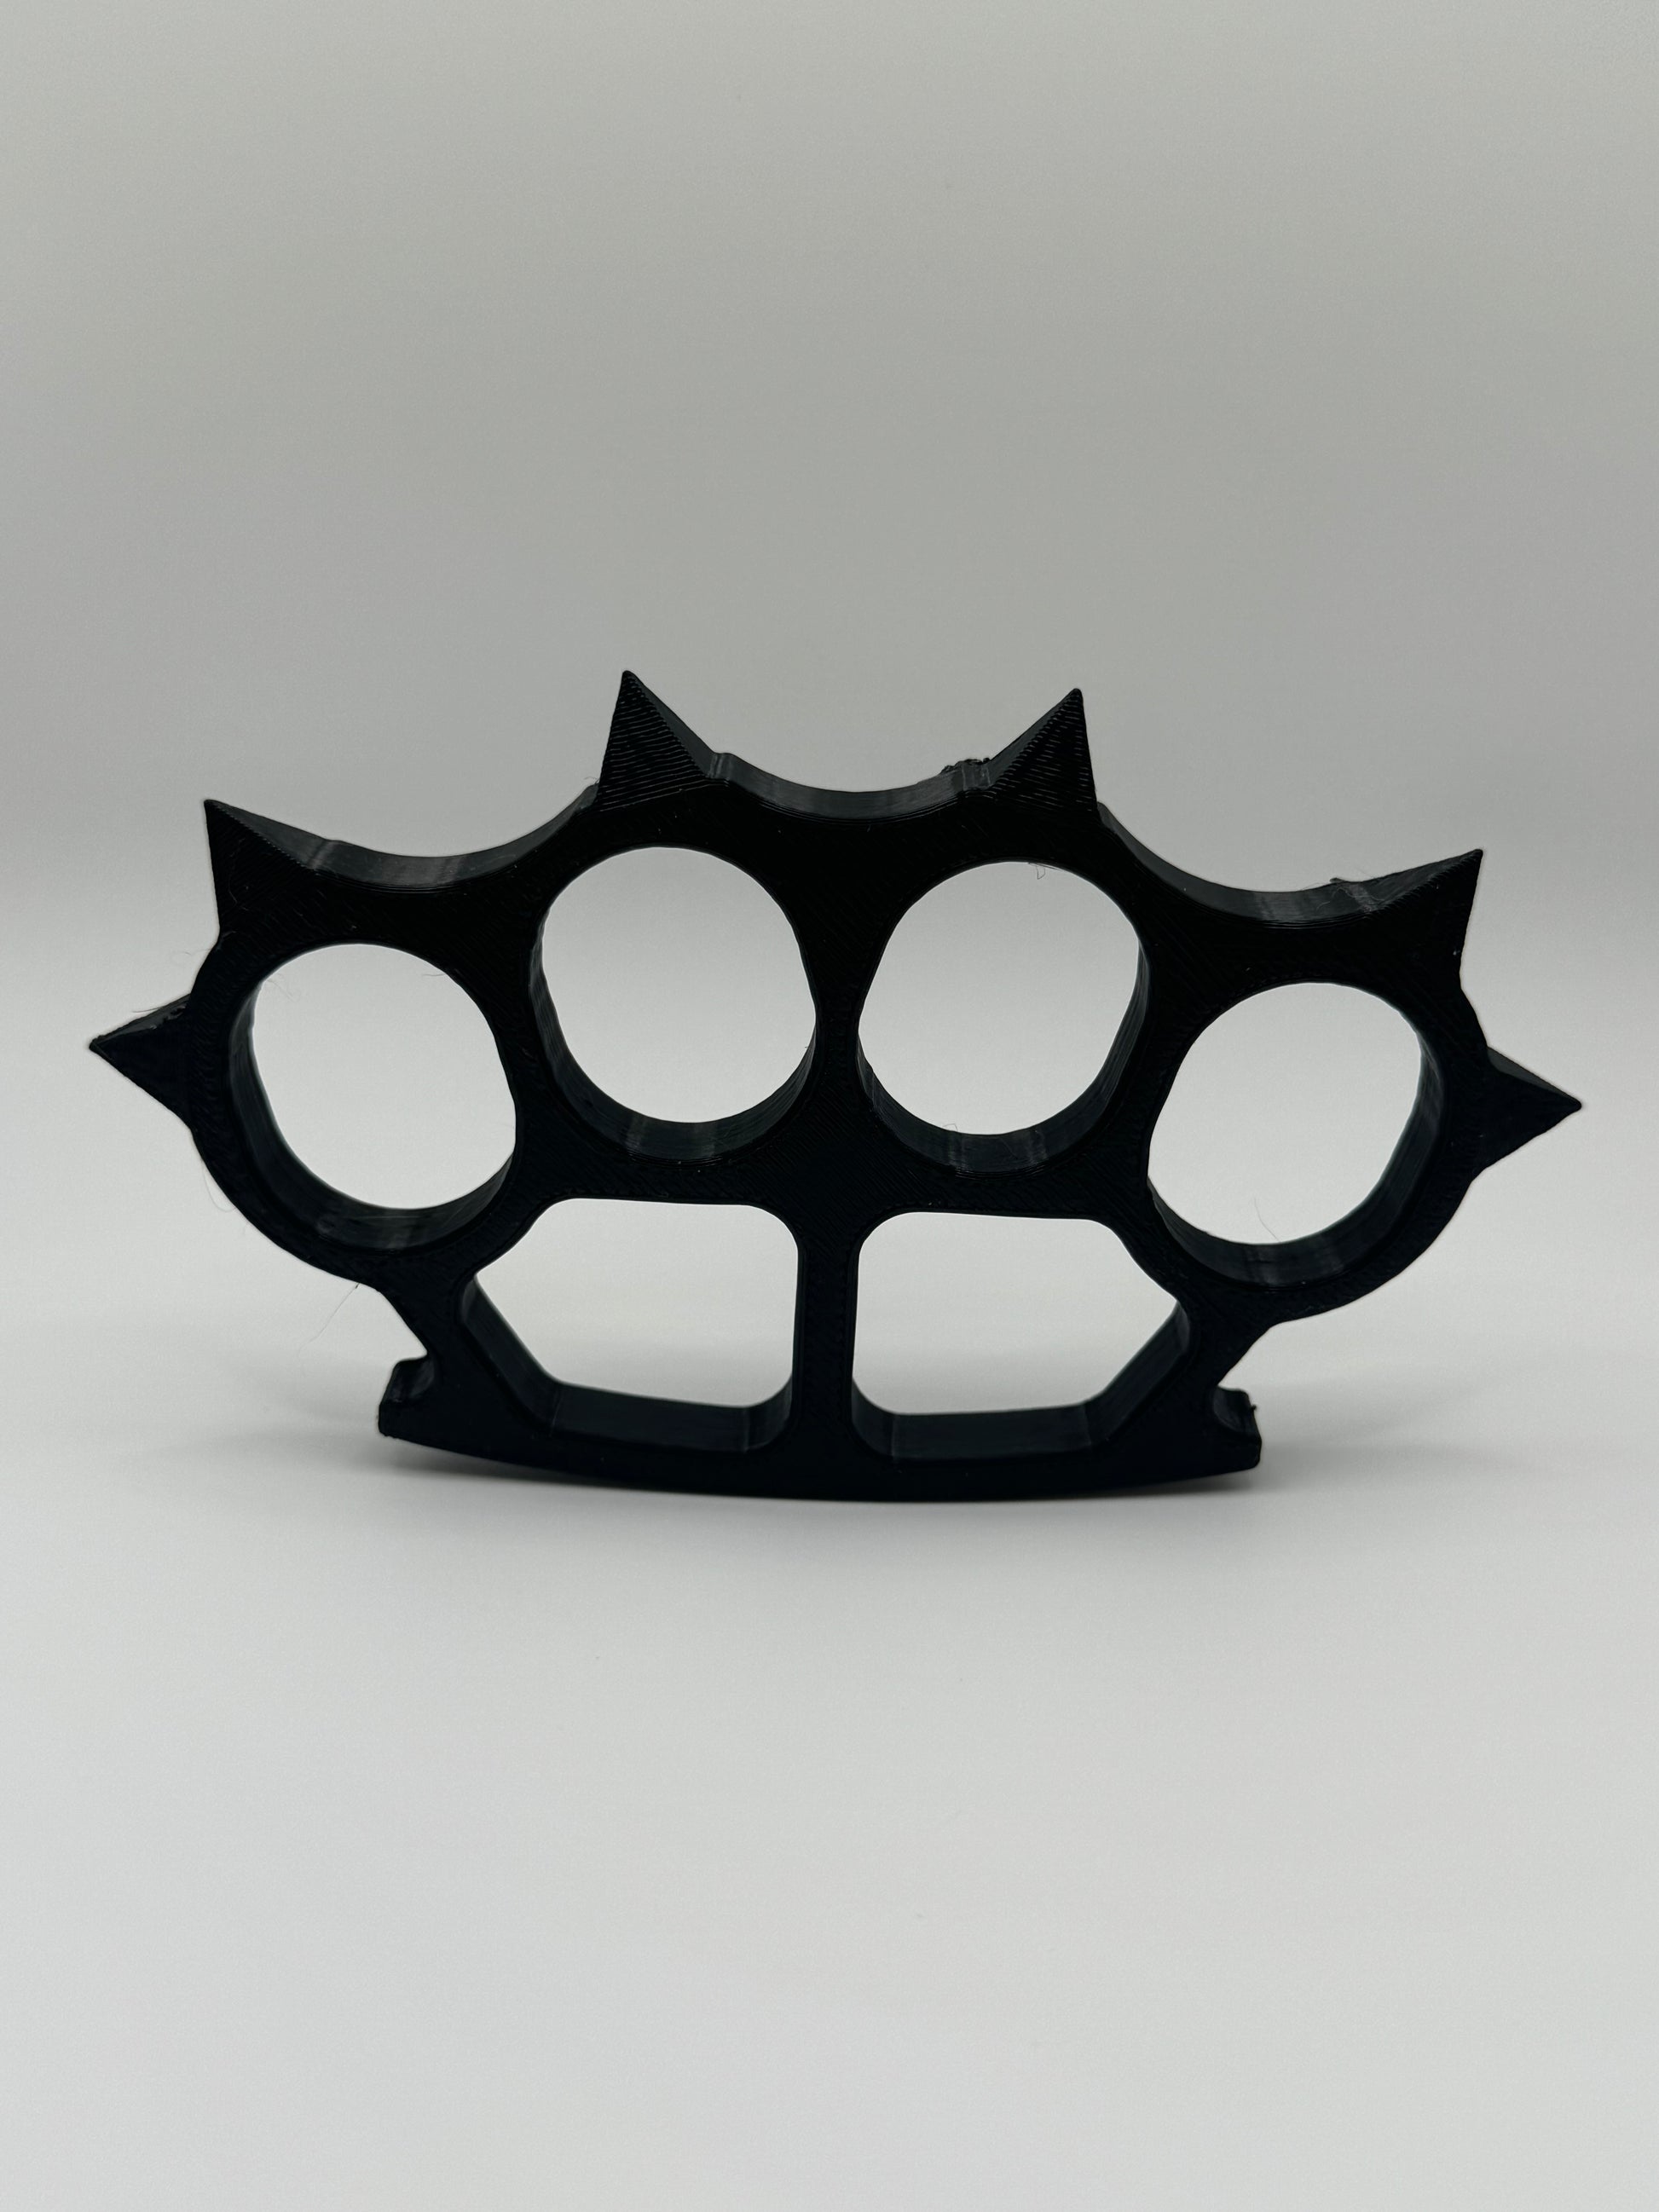 Spiked Knuckles Version 1.0 in Black  Brass Knuckles That Are Legal In  Canada!